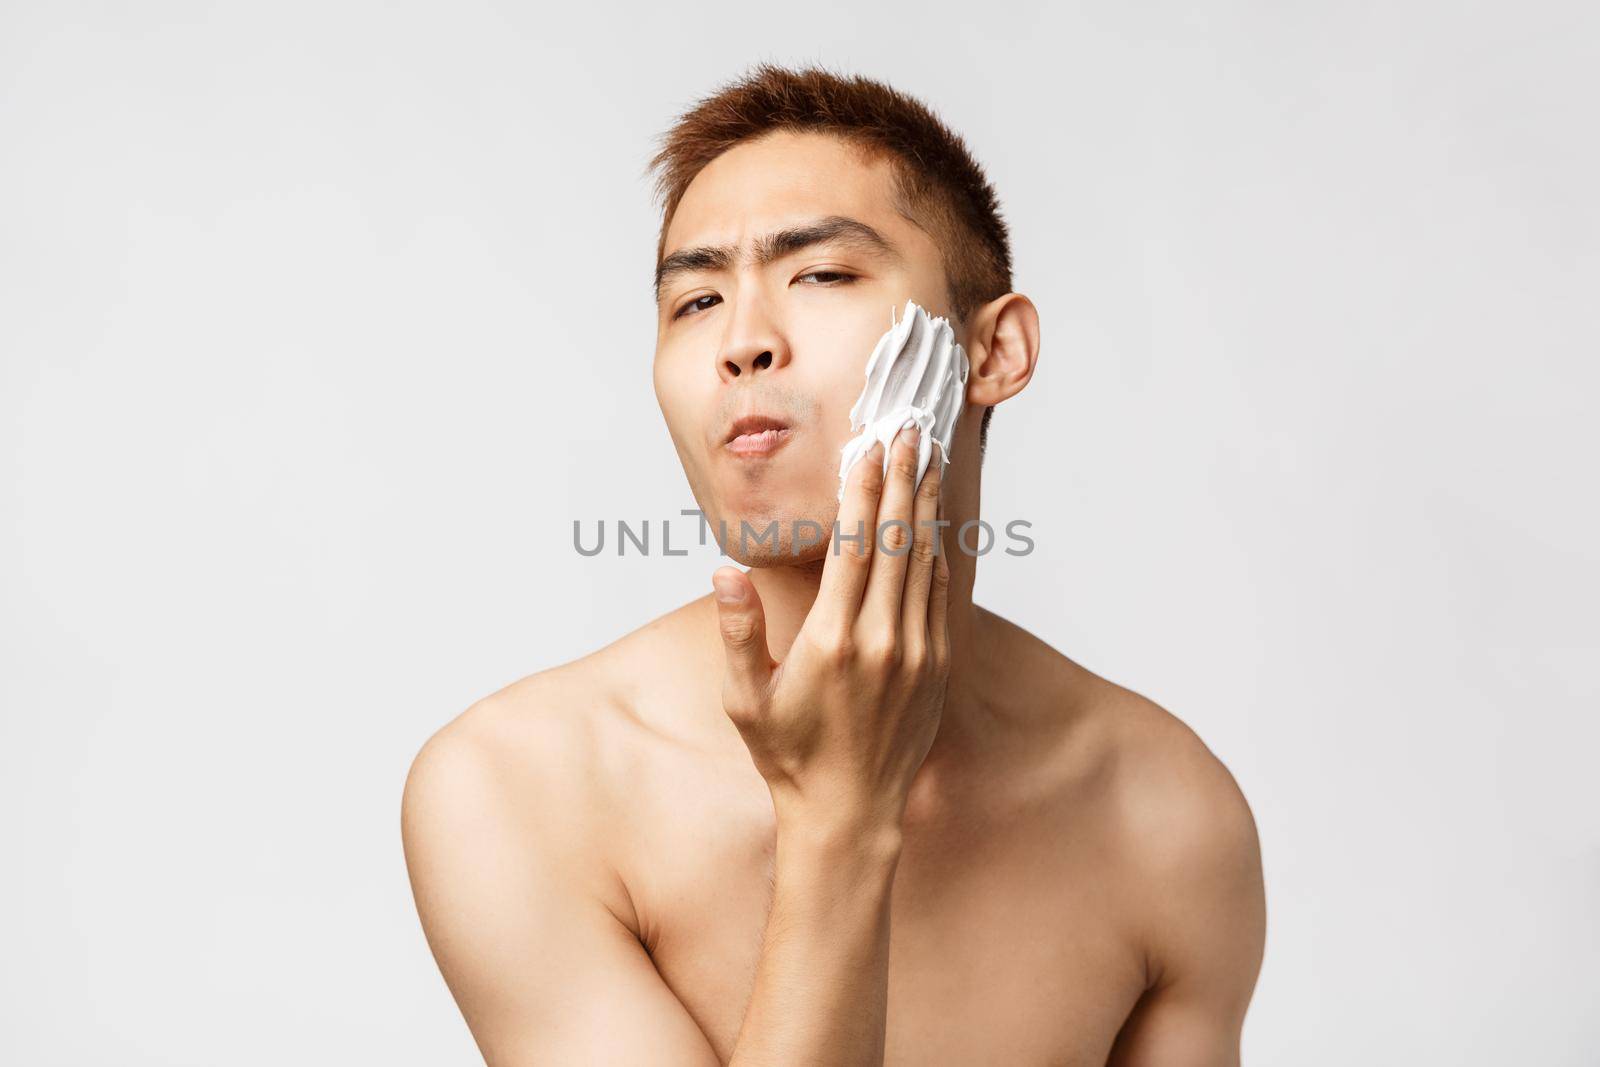 Beauty, people and hygiene concept. Portrait of funny handsome young man with naked torso, looking at bathroom mirror, apply shaving cream to face, standing white background.